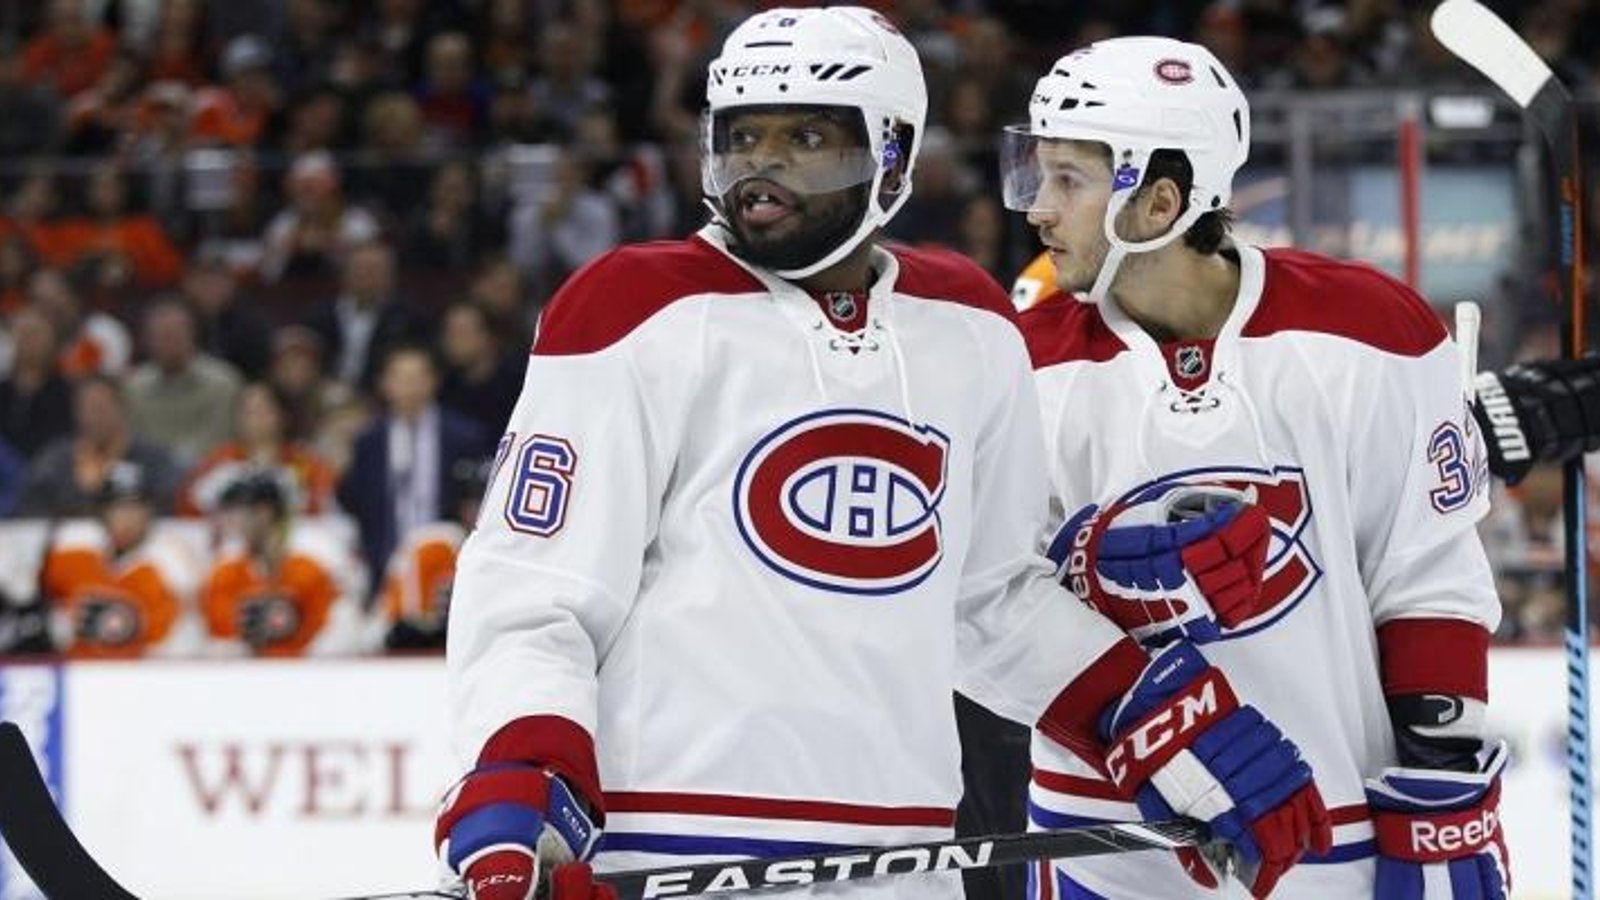 NHL GM comments on the rumors of P.K. Subban being traded to his team.